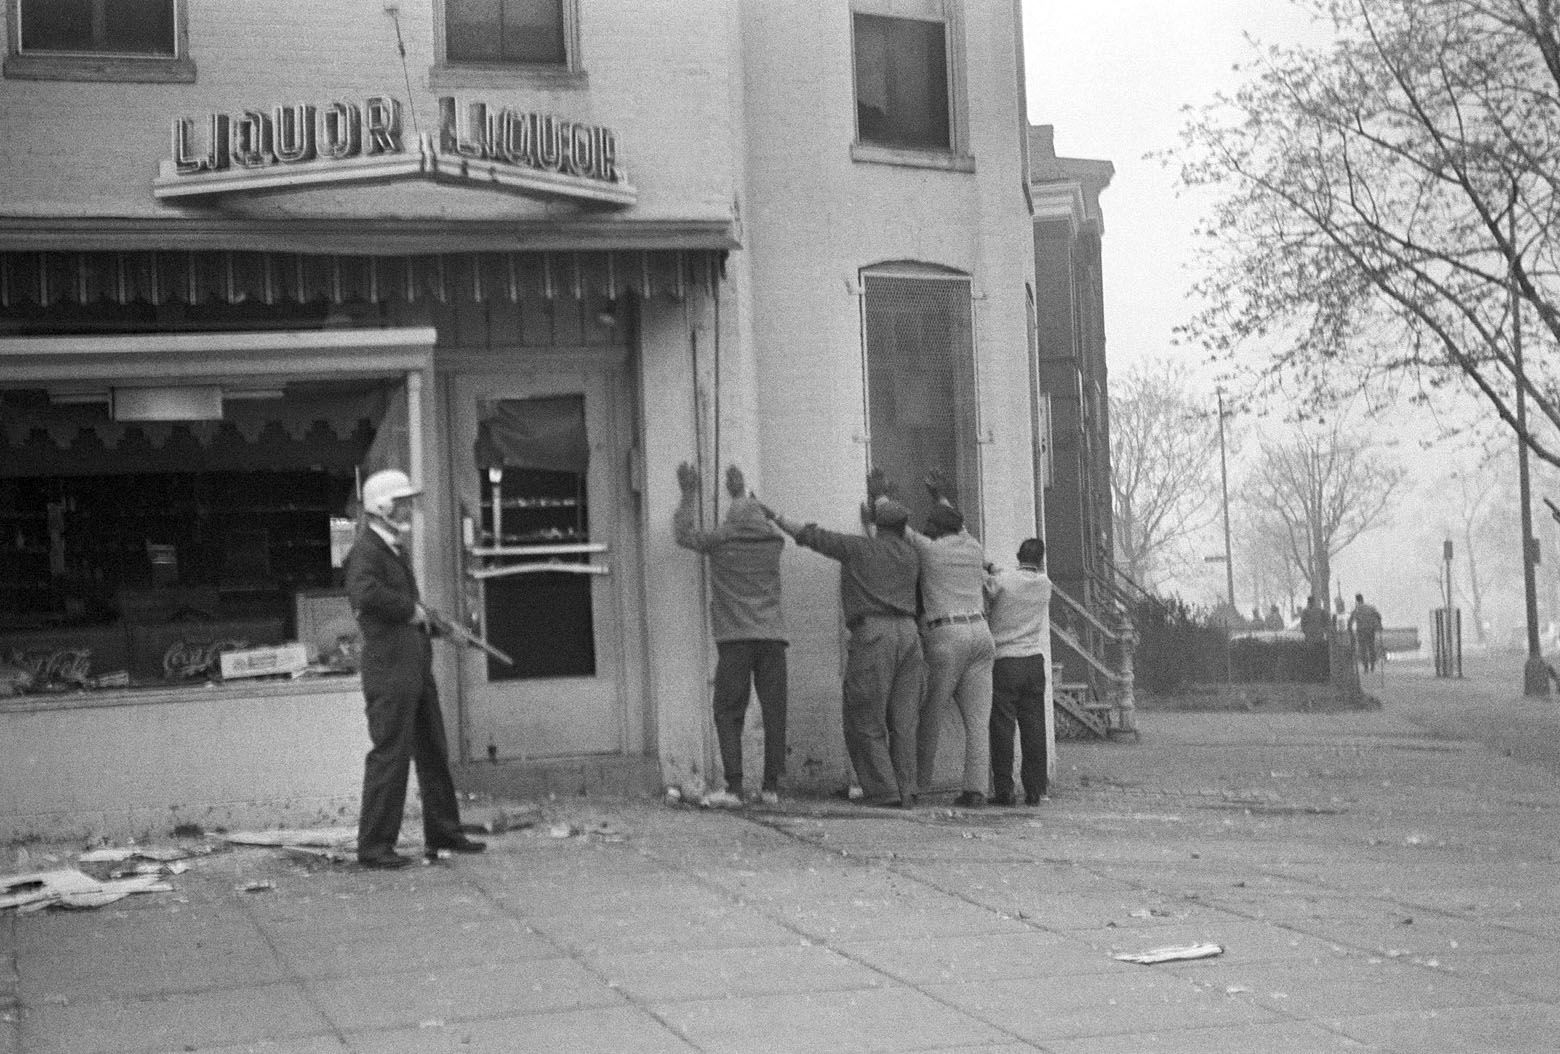 A helmeted policeman, armed with a shotgun, lines up four men after the window of a liquor store was smashed in northeast Washington on April 5, 1968 during renewed looting and burning. (AP Photo/Dozier Mobley)